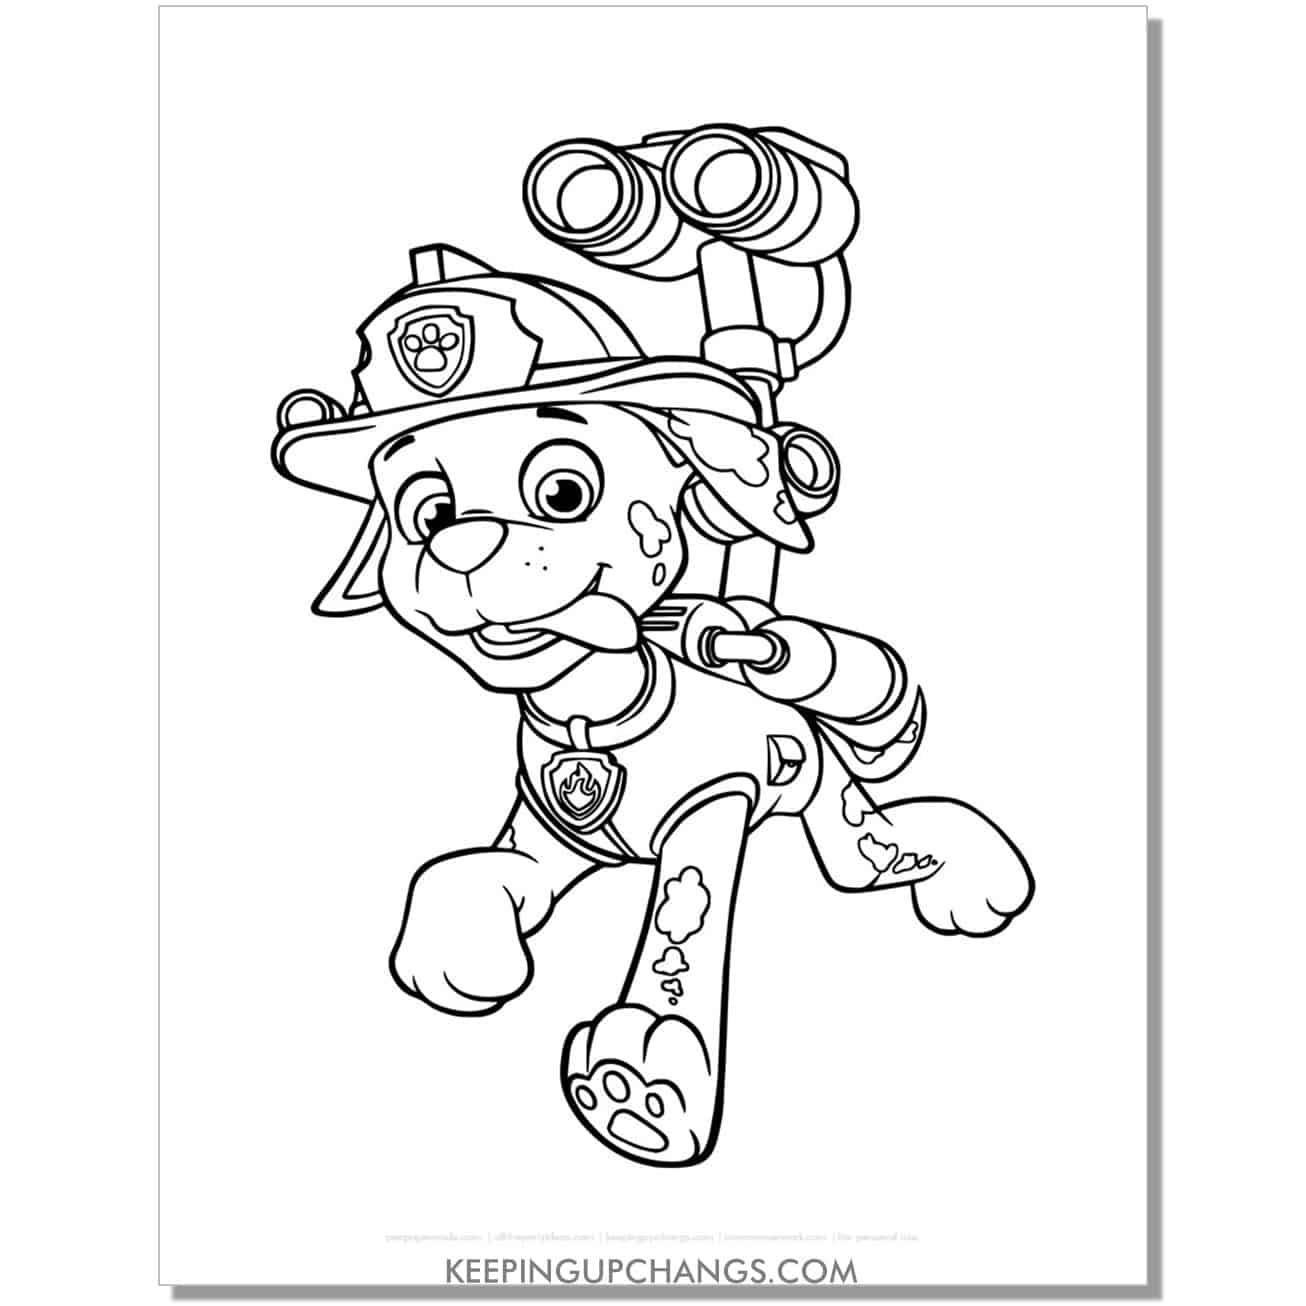 free marshall with action gear ready paw patrol coloring page, sheet.